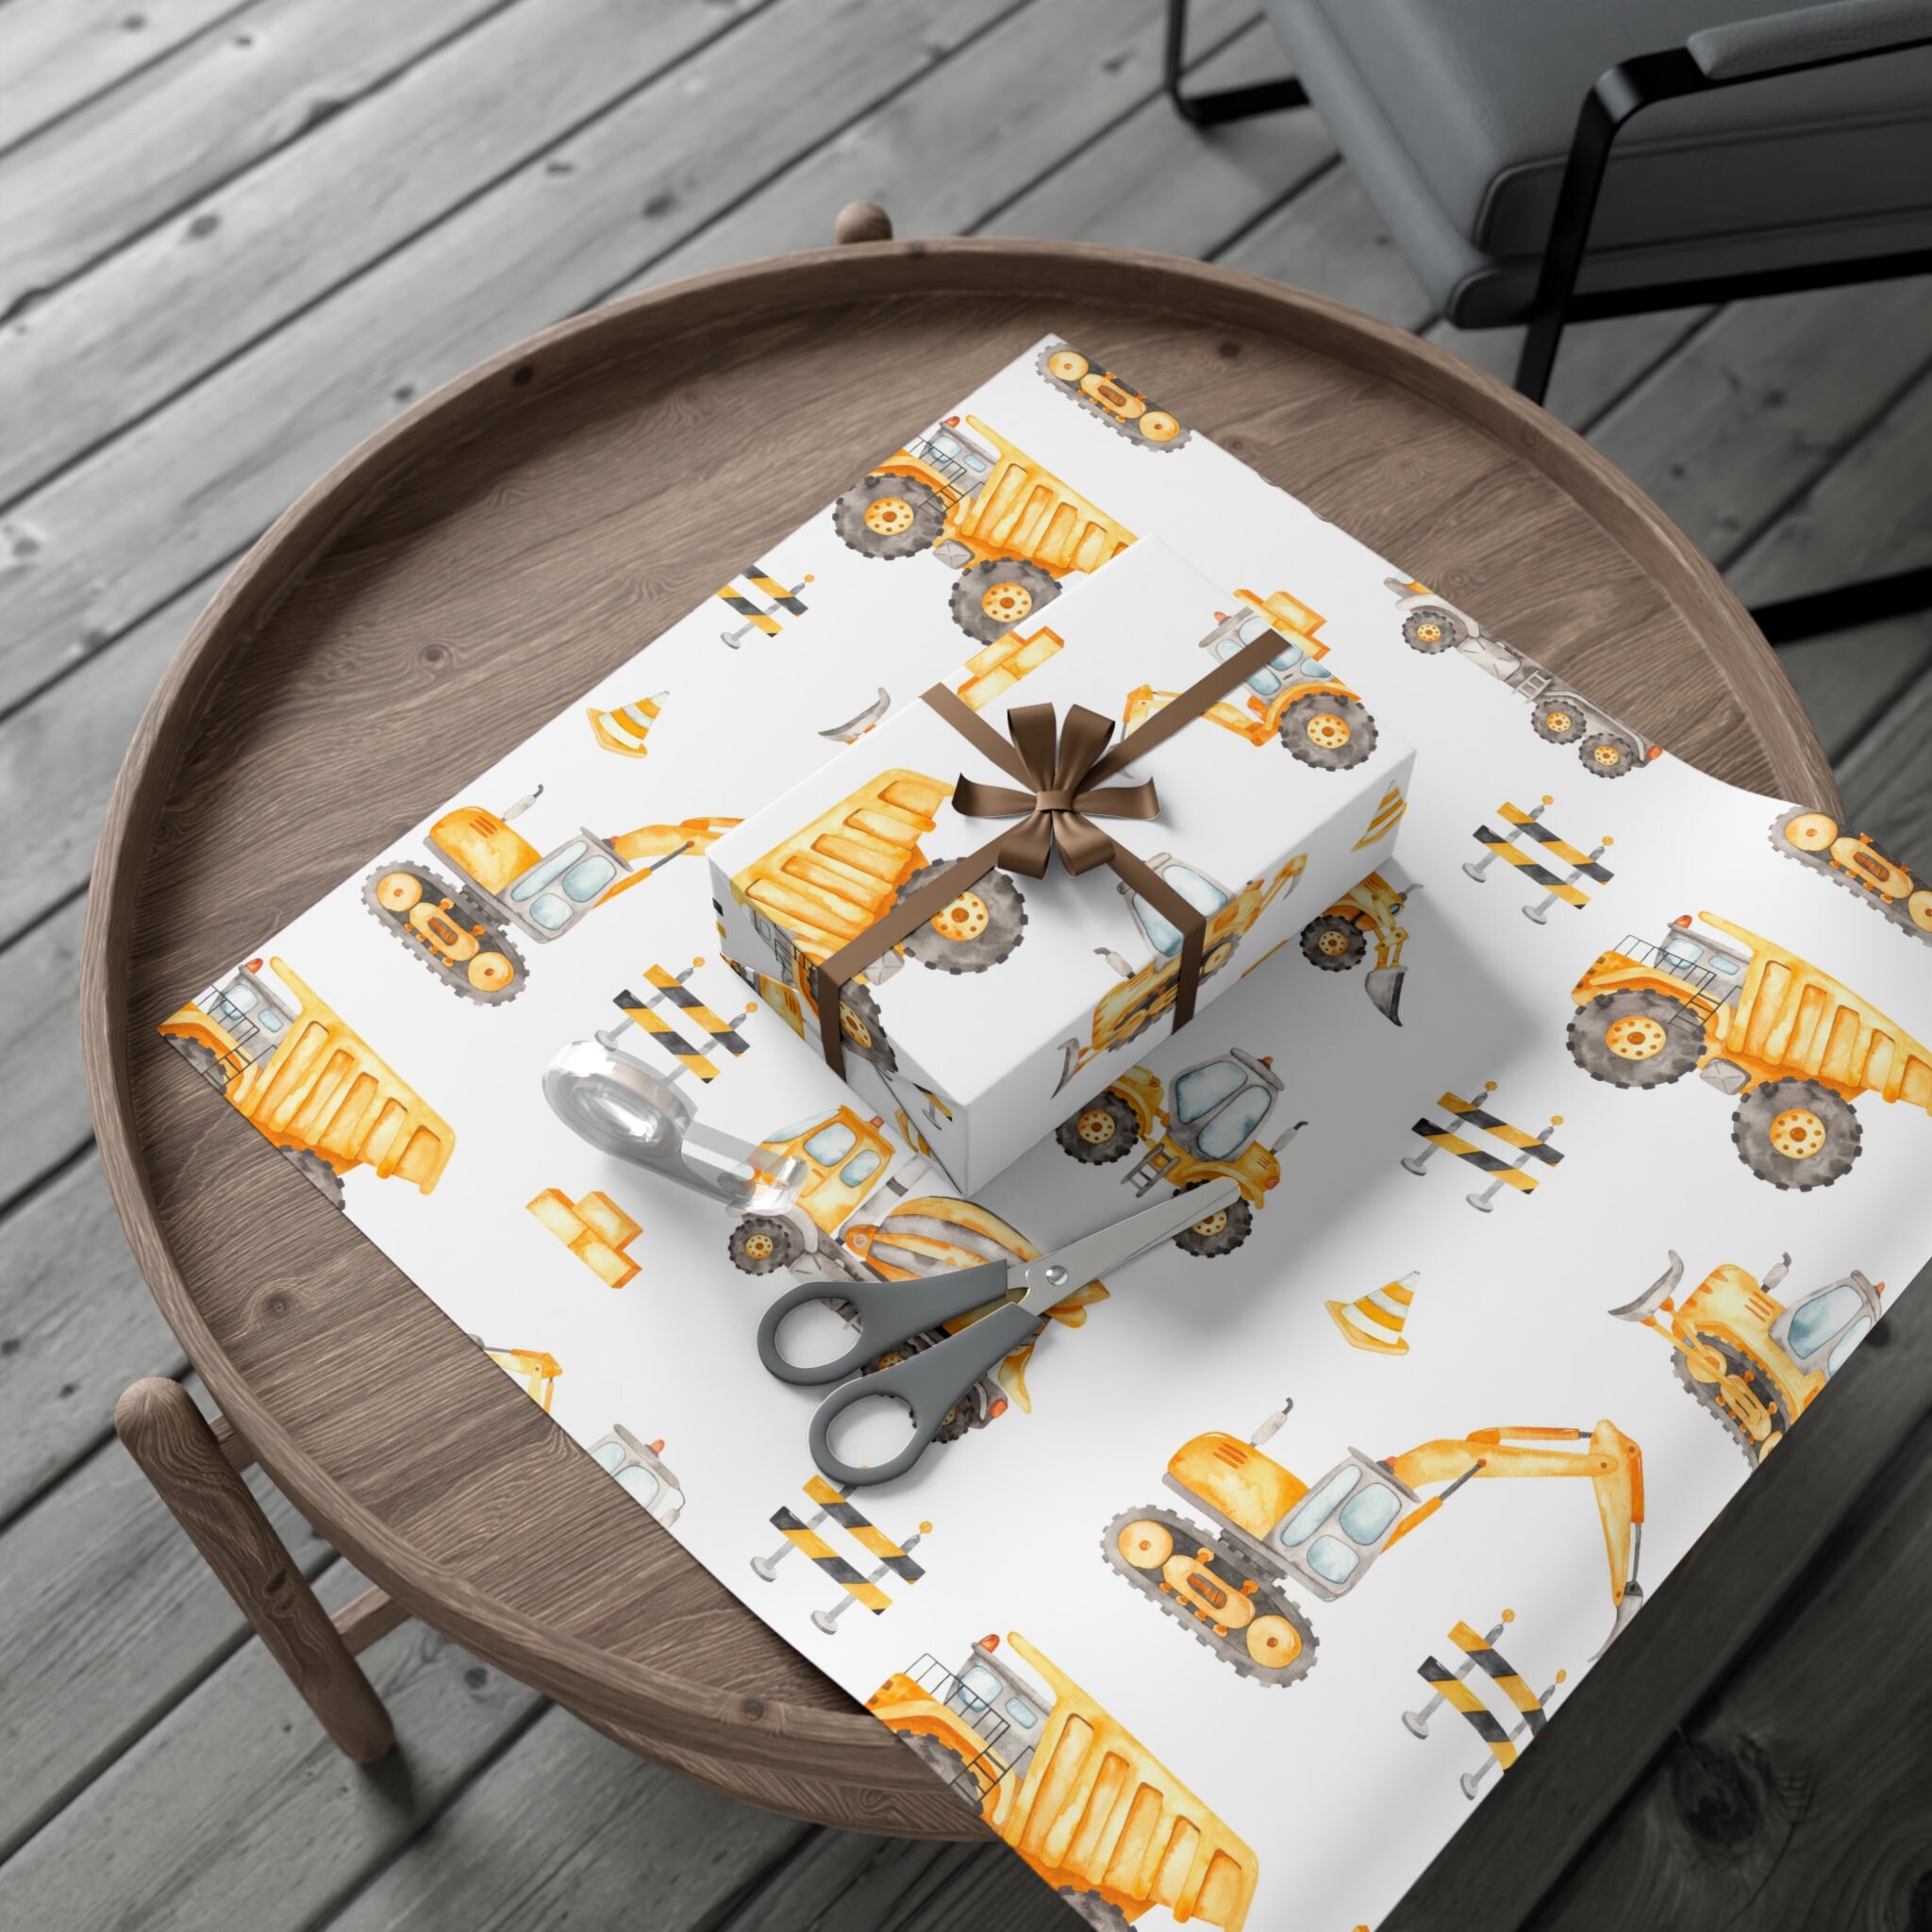 Sikiweiter Construction Wrapping Paper - 12 Sheets Construction Wrapping  Paper Birthday with Trucks - 19.7 x 27.6 Inches Per Sheet